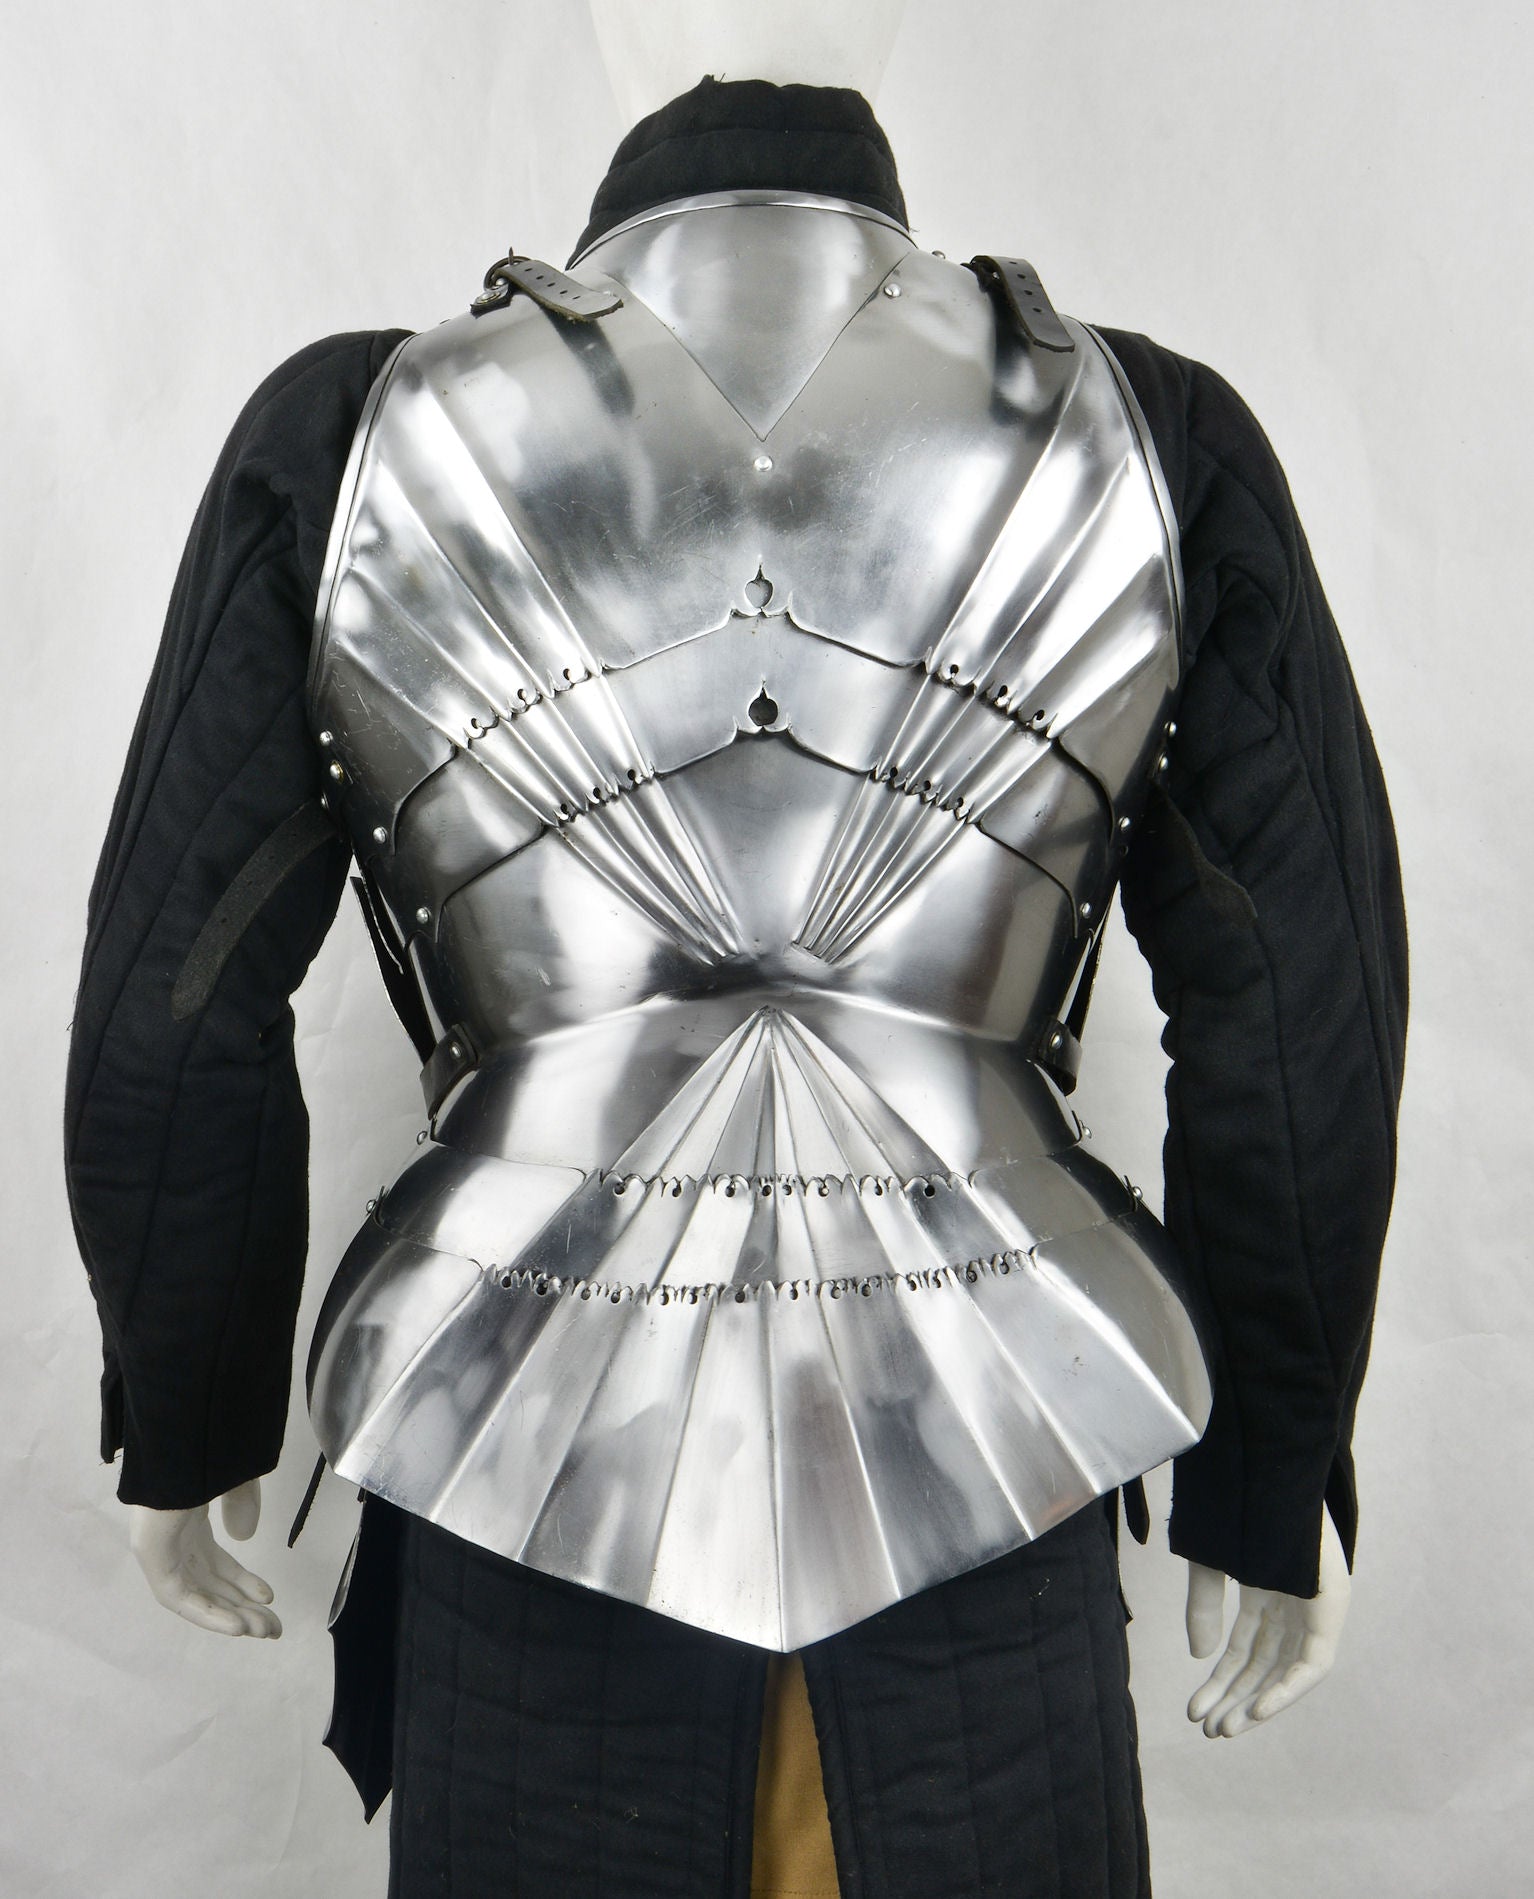 Late Medieval Gothic Cuirass with Tassets - 18 Gauge Steel